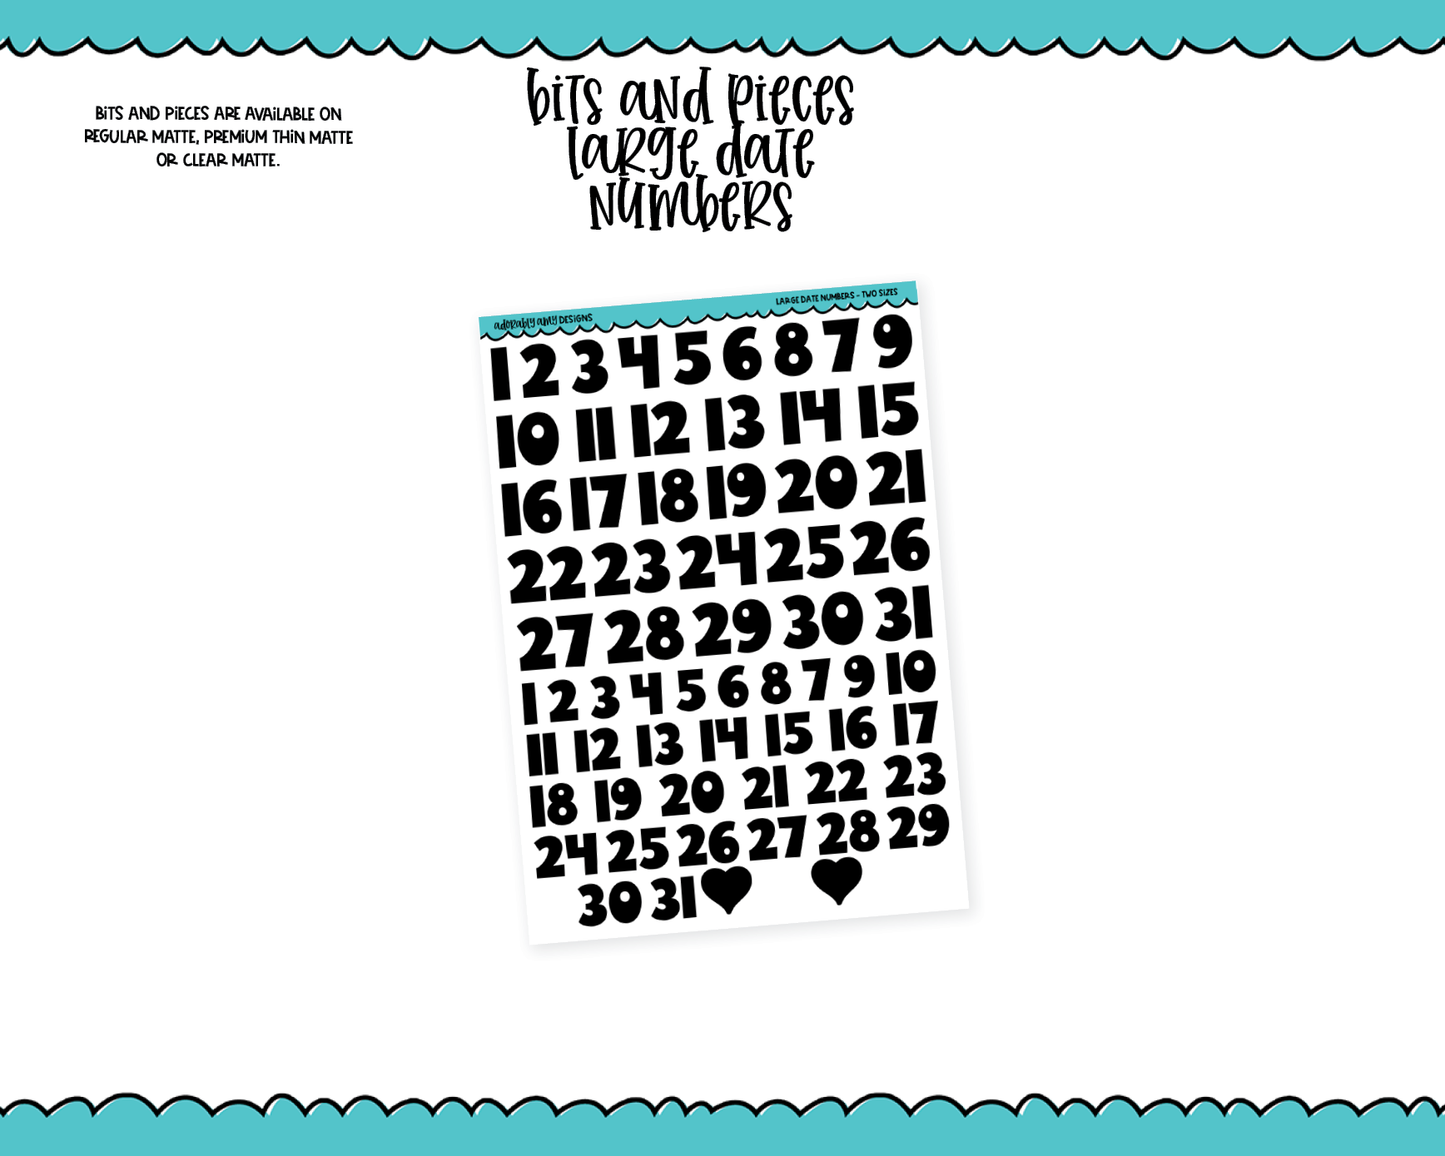 Bits & Pieces Large Date Numbers 2 Sizes Kit Addons for Any Planner